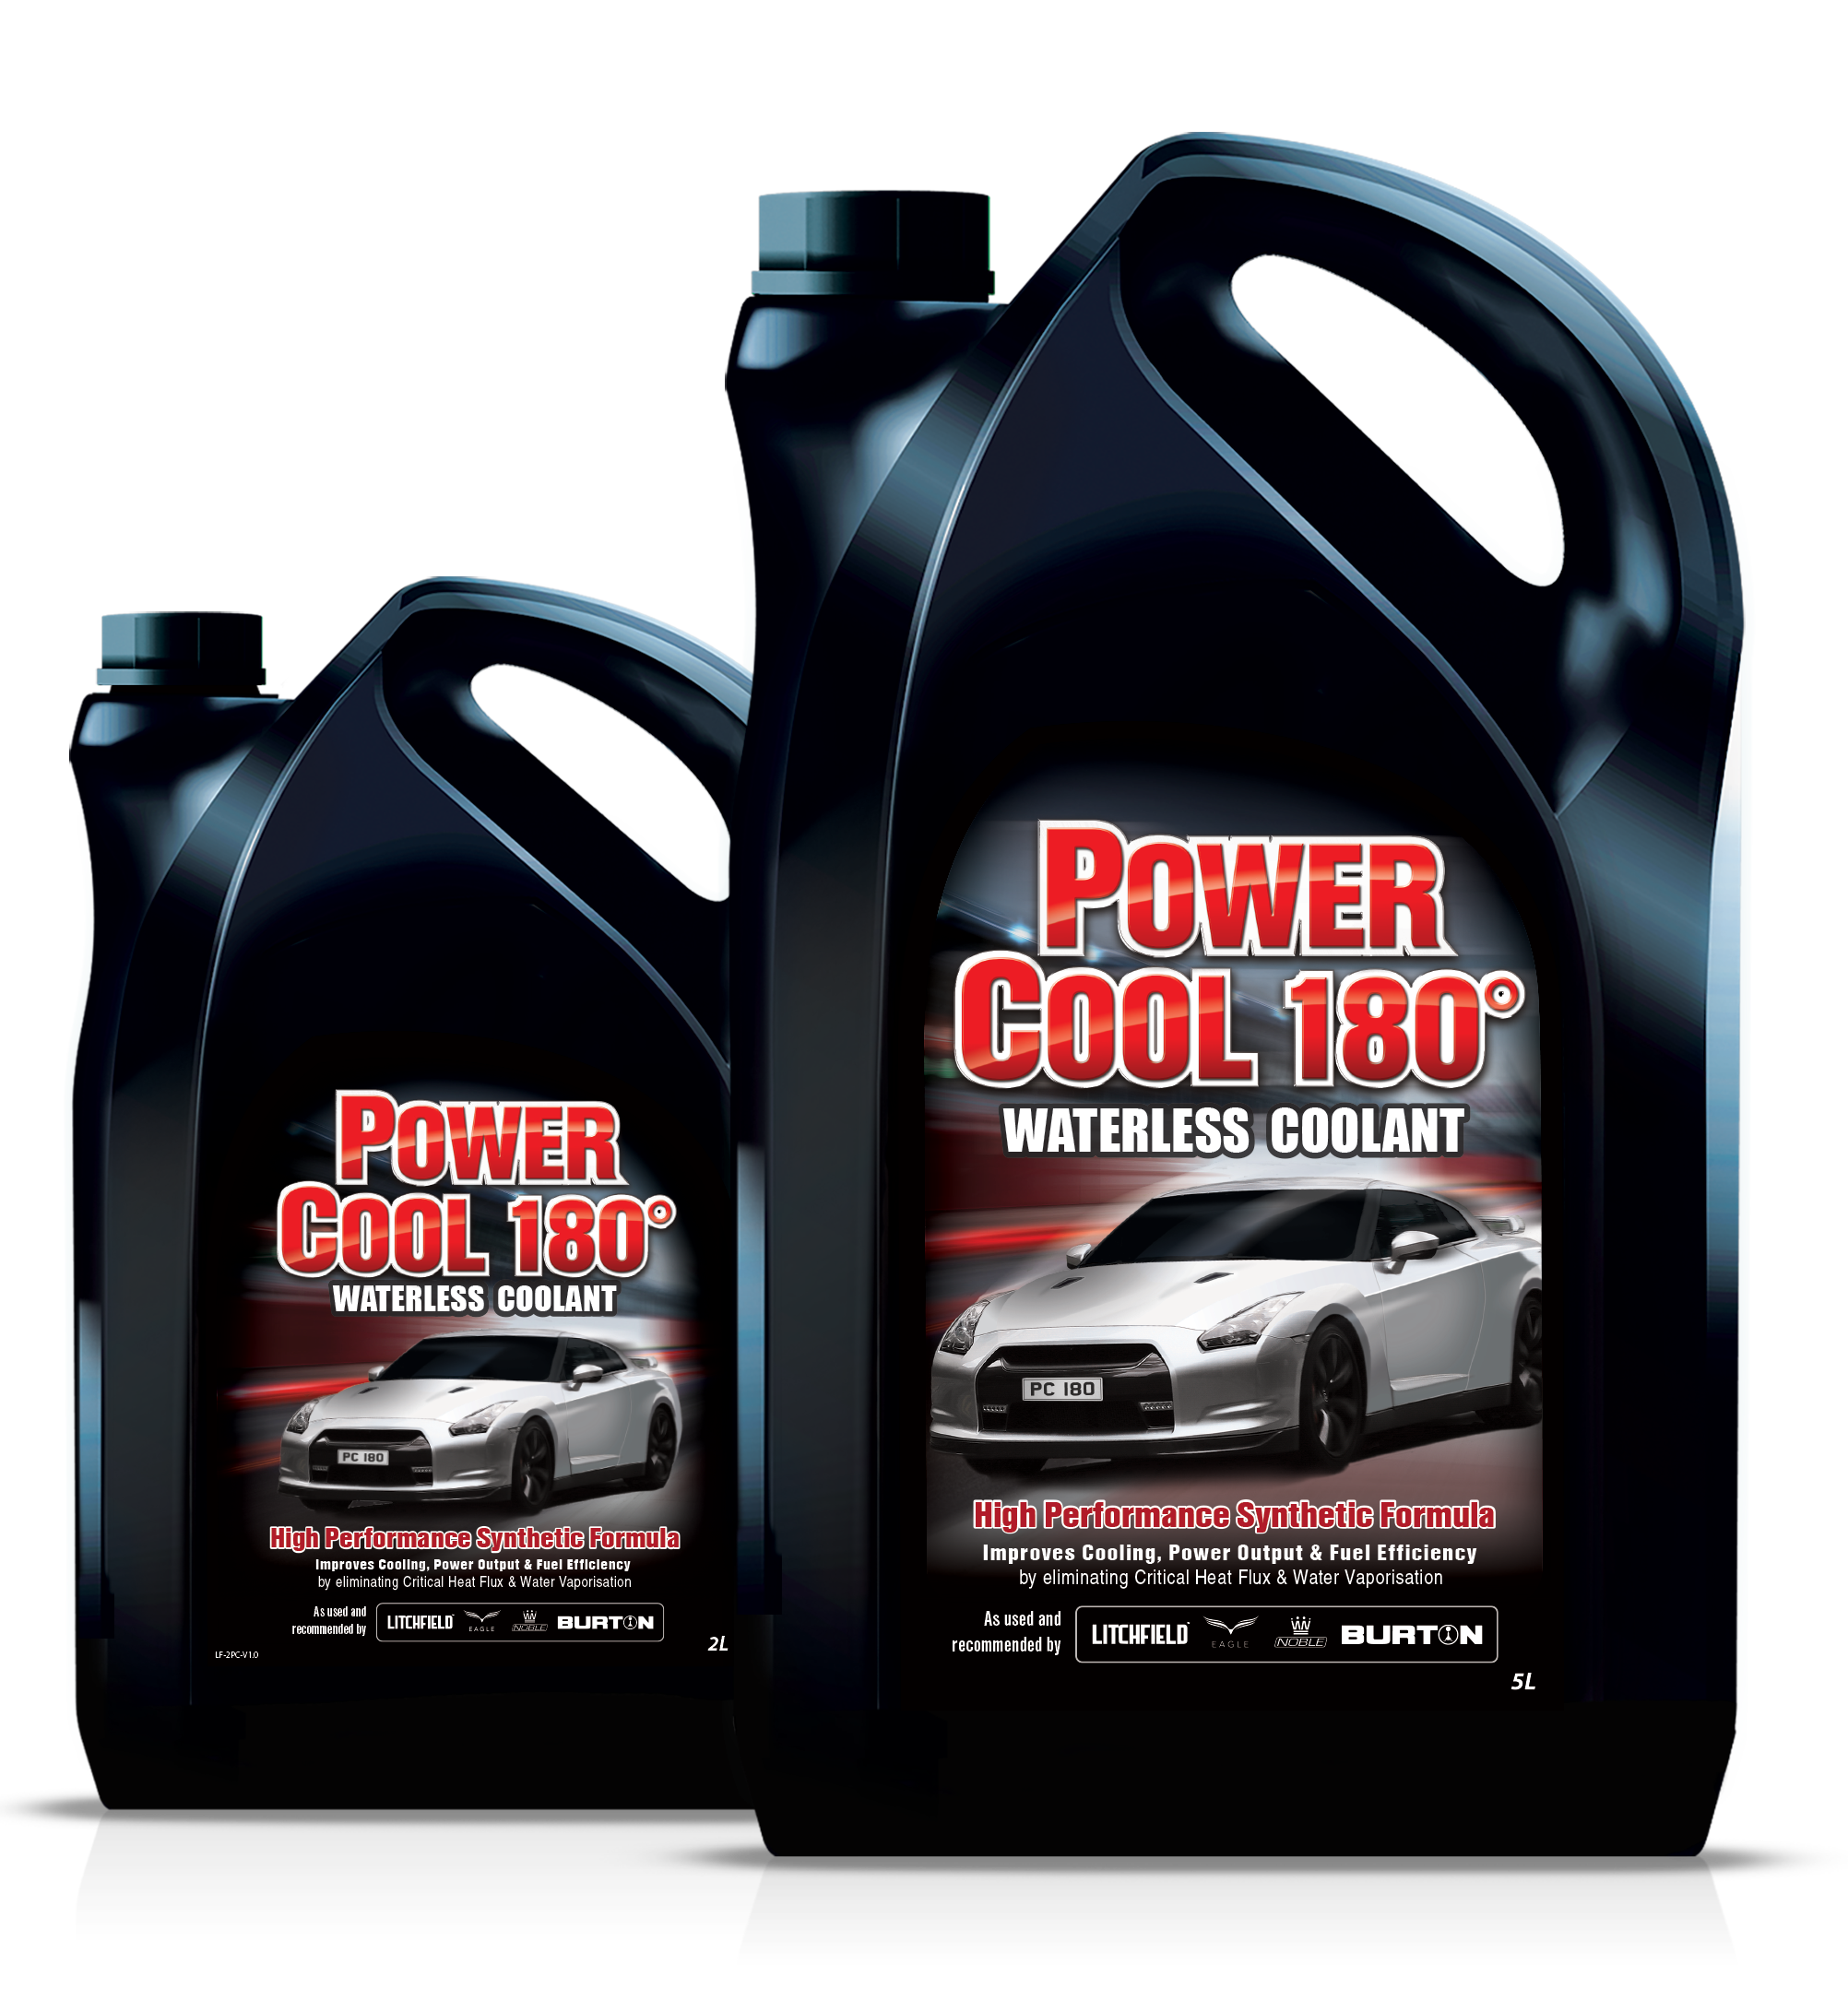 Power Cool 180° is the coolant of 